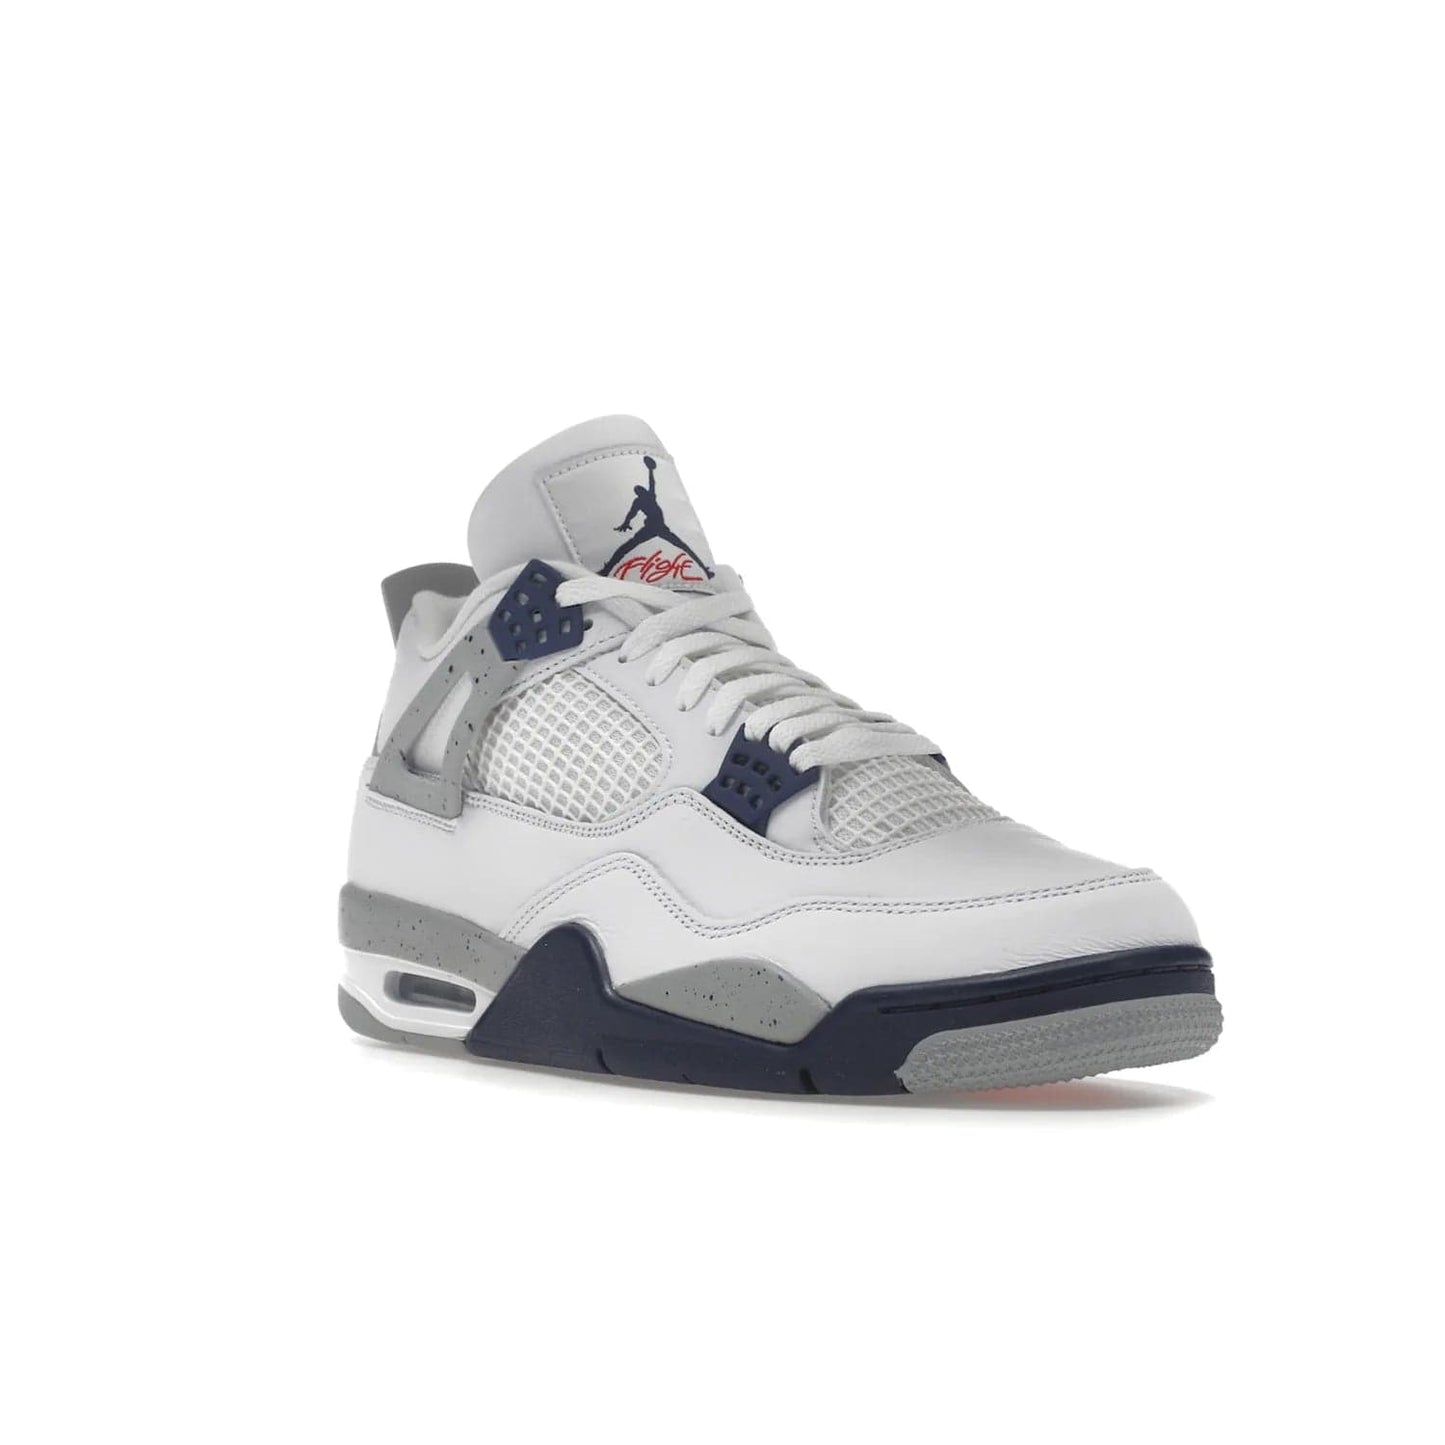 Jordan 4 Retro Midnight Navy - Image 6 - Only at www.BallersClubKickz.com - Shop the Air Jordan Retro 4 White Midnight Navy. Stand out with a classic white leather upper, black support wings, midnight navy eyelets, and Crimson Jumpman tongue tag. Unbeatable comfort with two-tone polyurethane midsole with encapsulated Air technology. Get yours before October 29th, 2022.